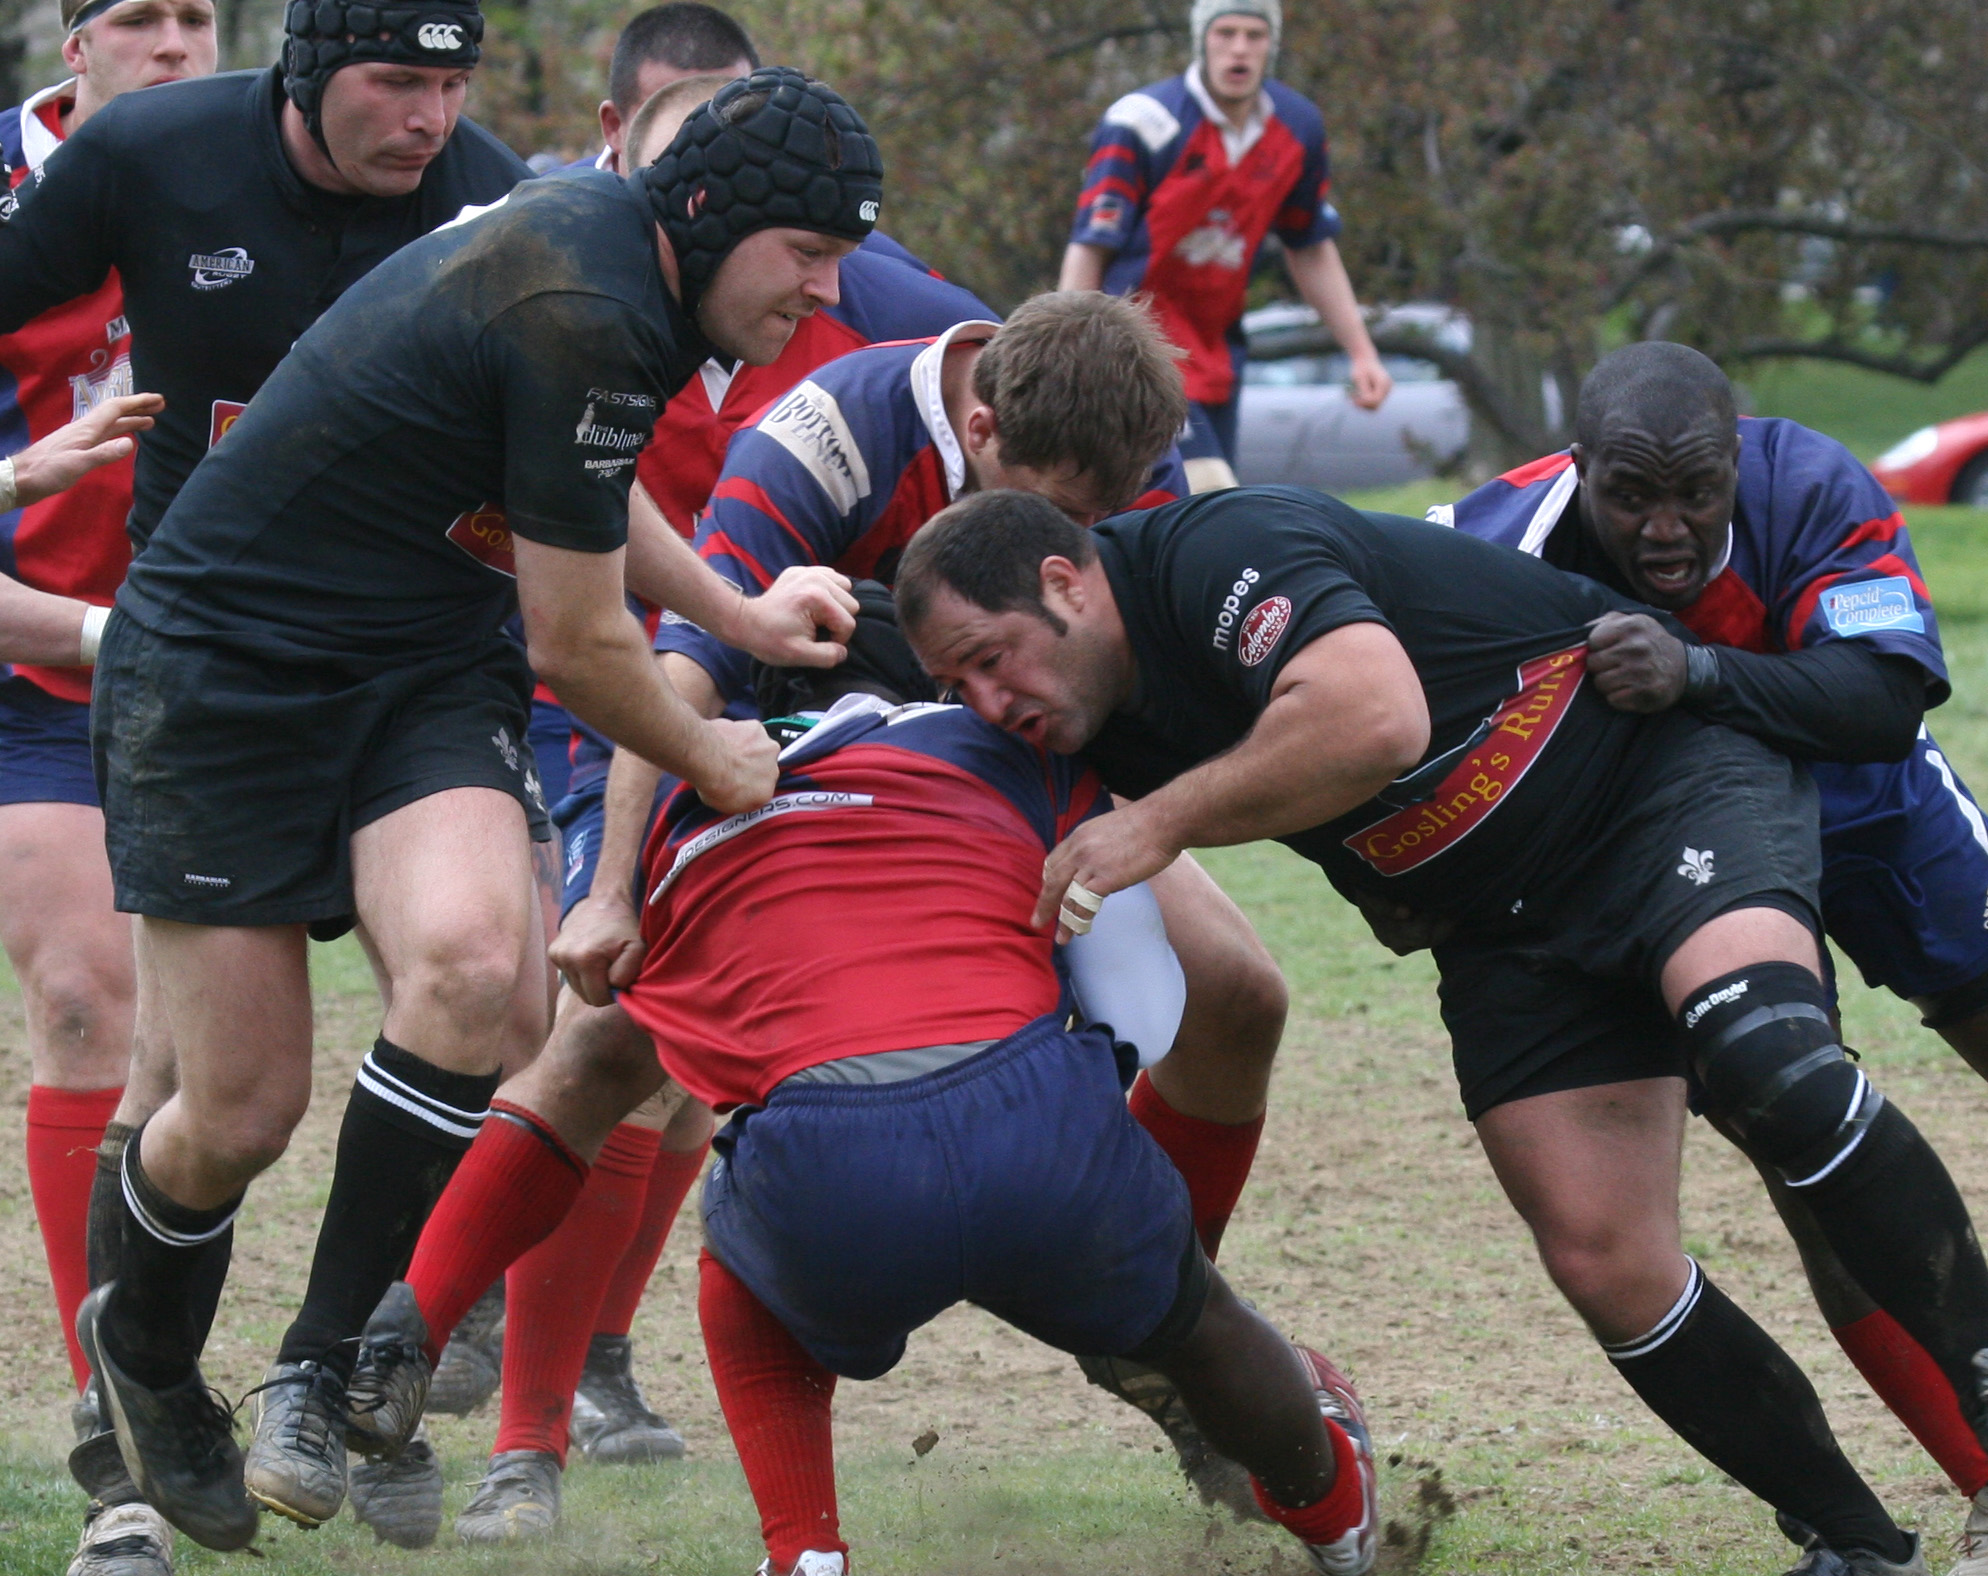 some men are playing rugby against each other